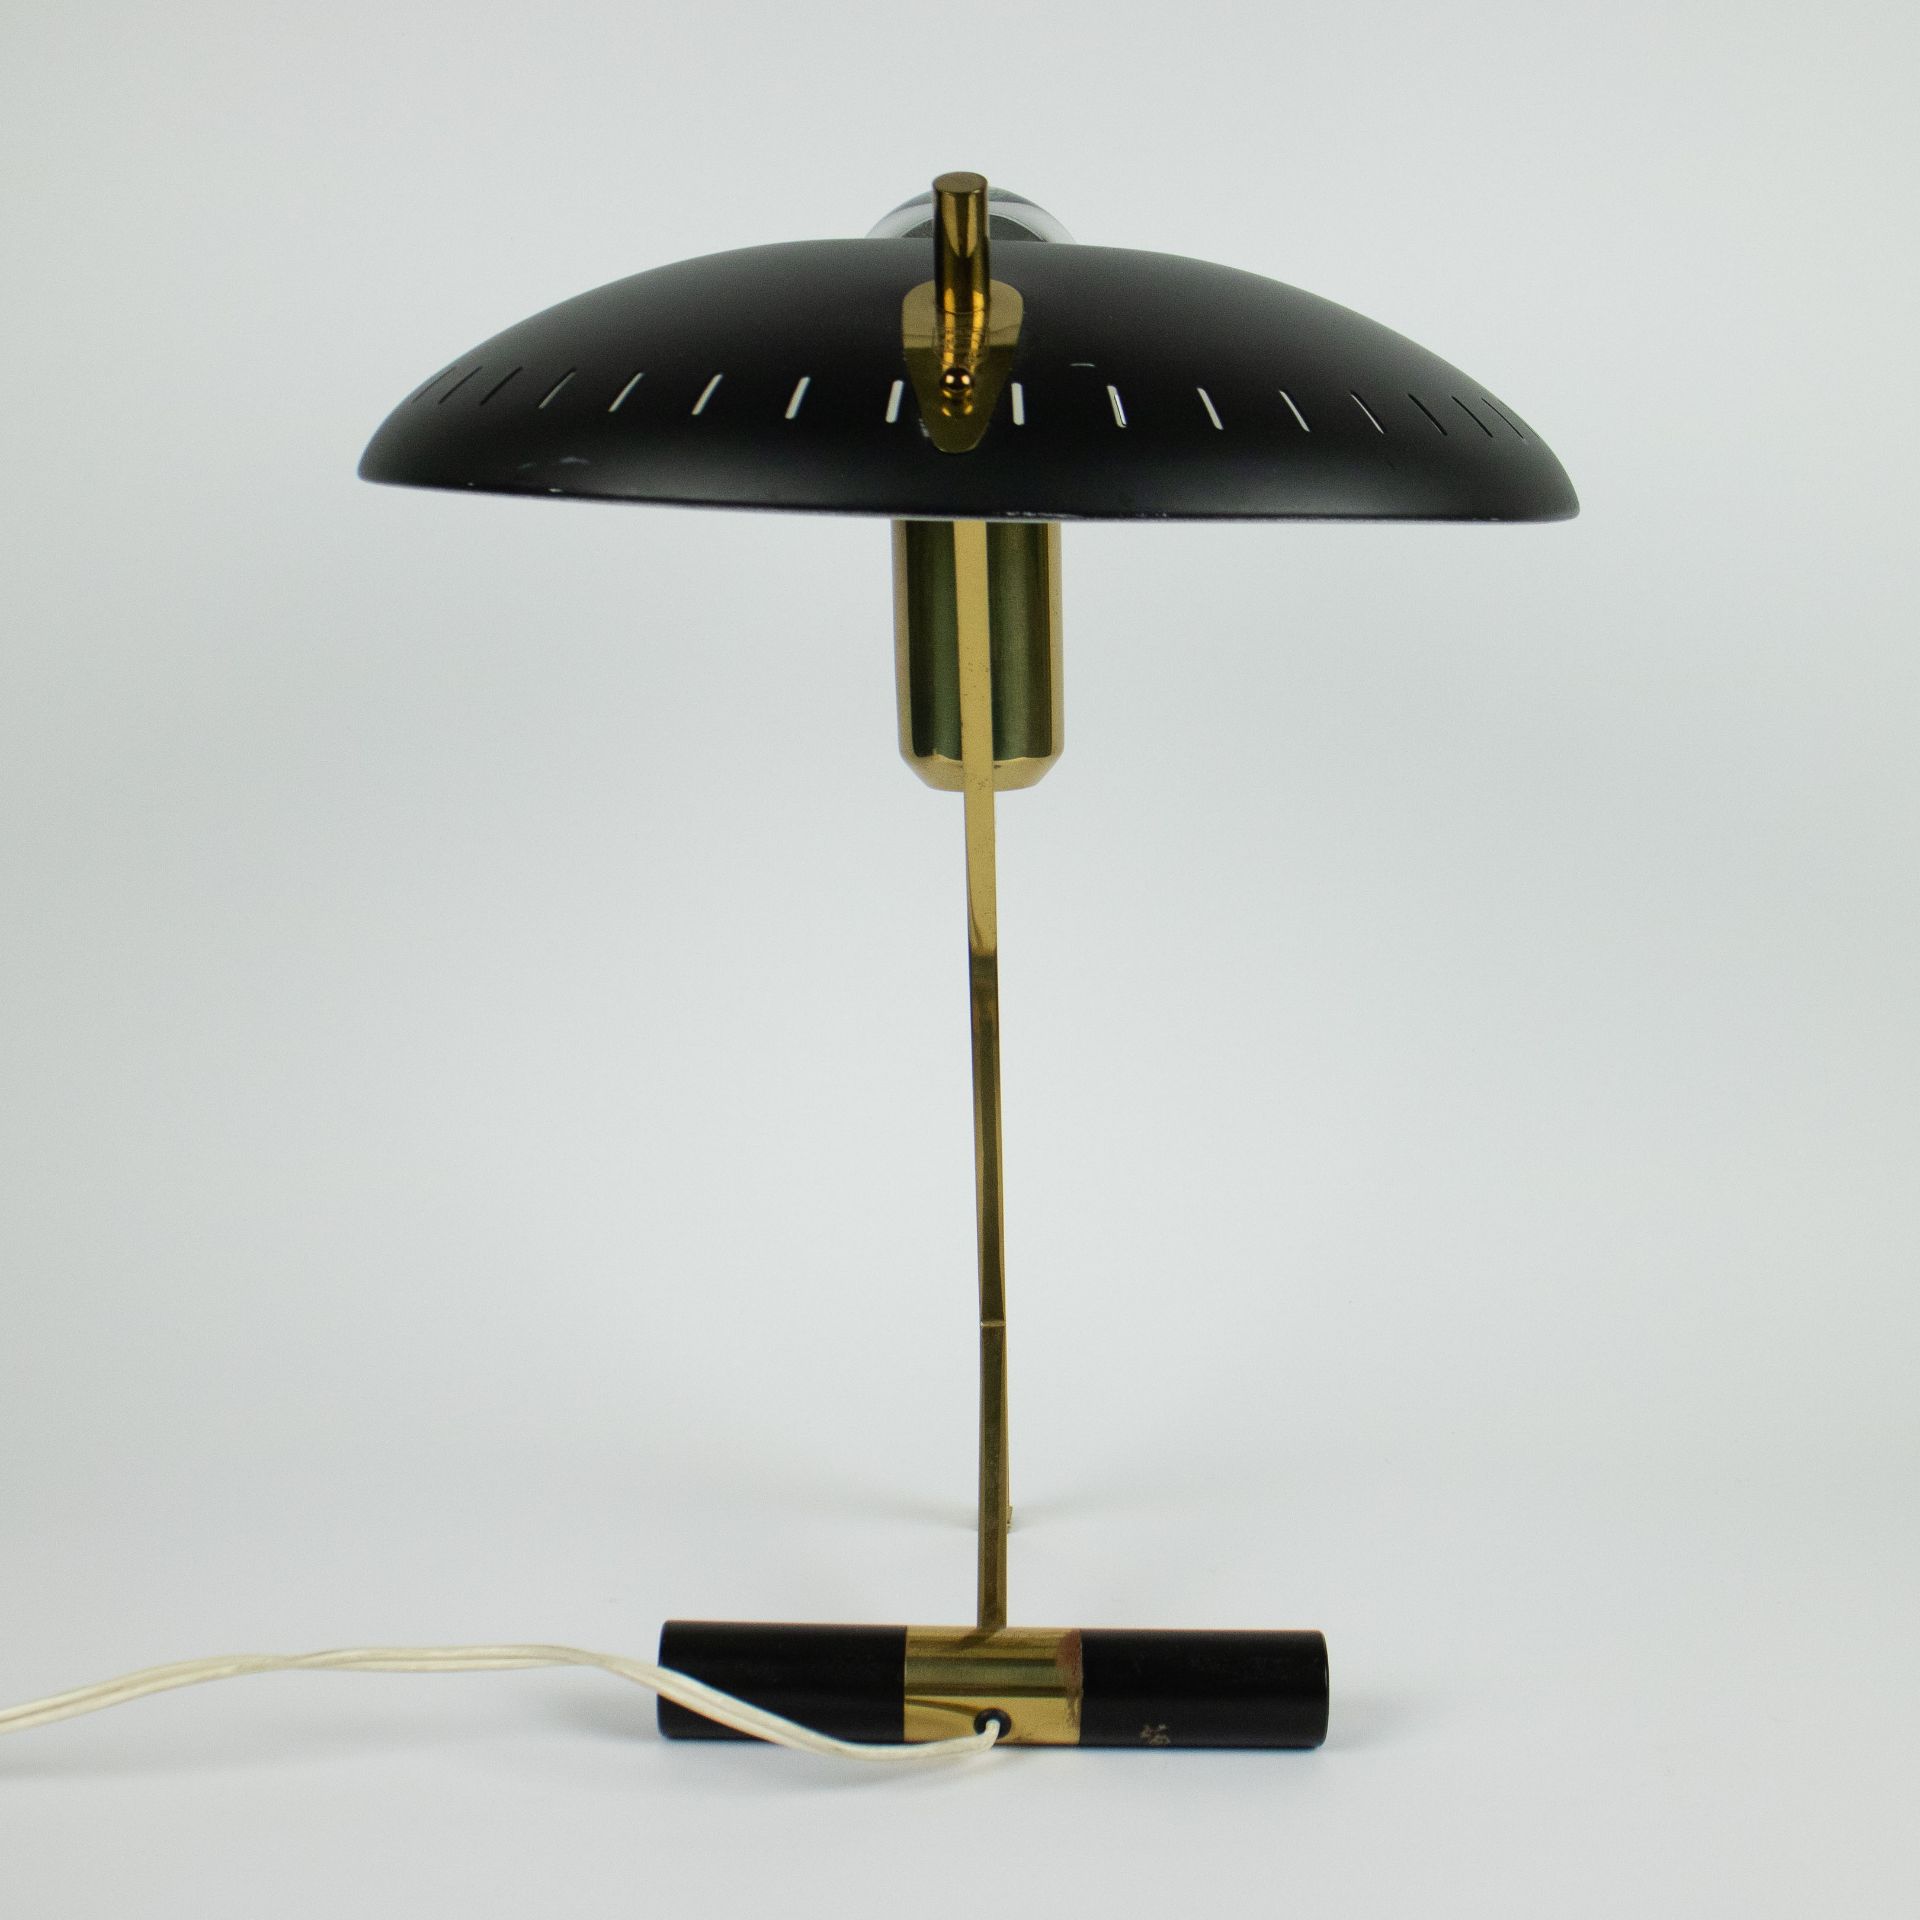 Model Z Lamp in Brass and Black Metal by Louis Kalff for Philips, 1950s - Image 5 of 6